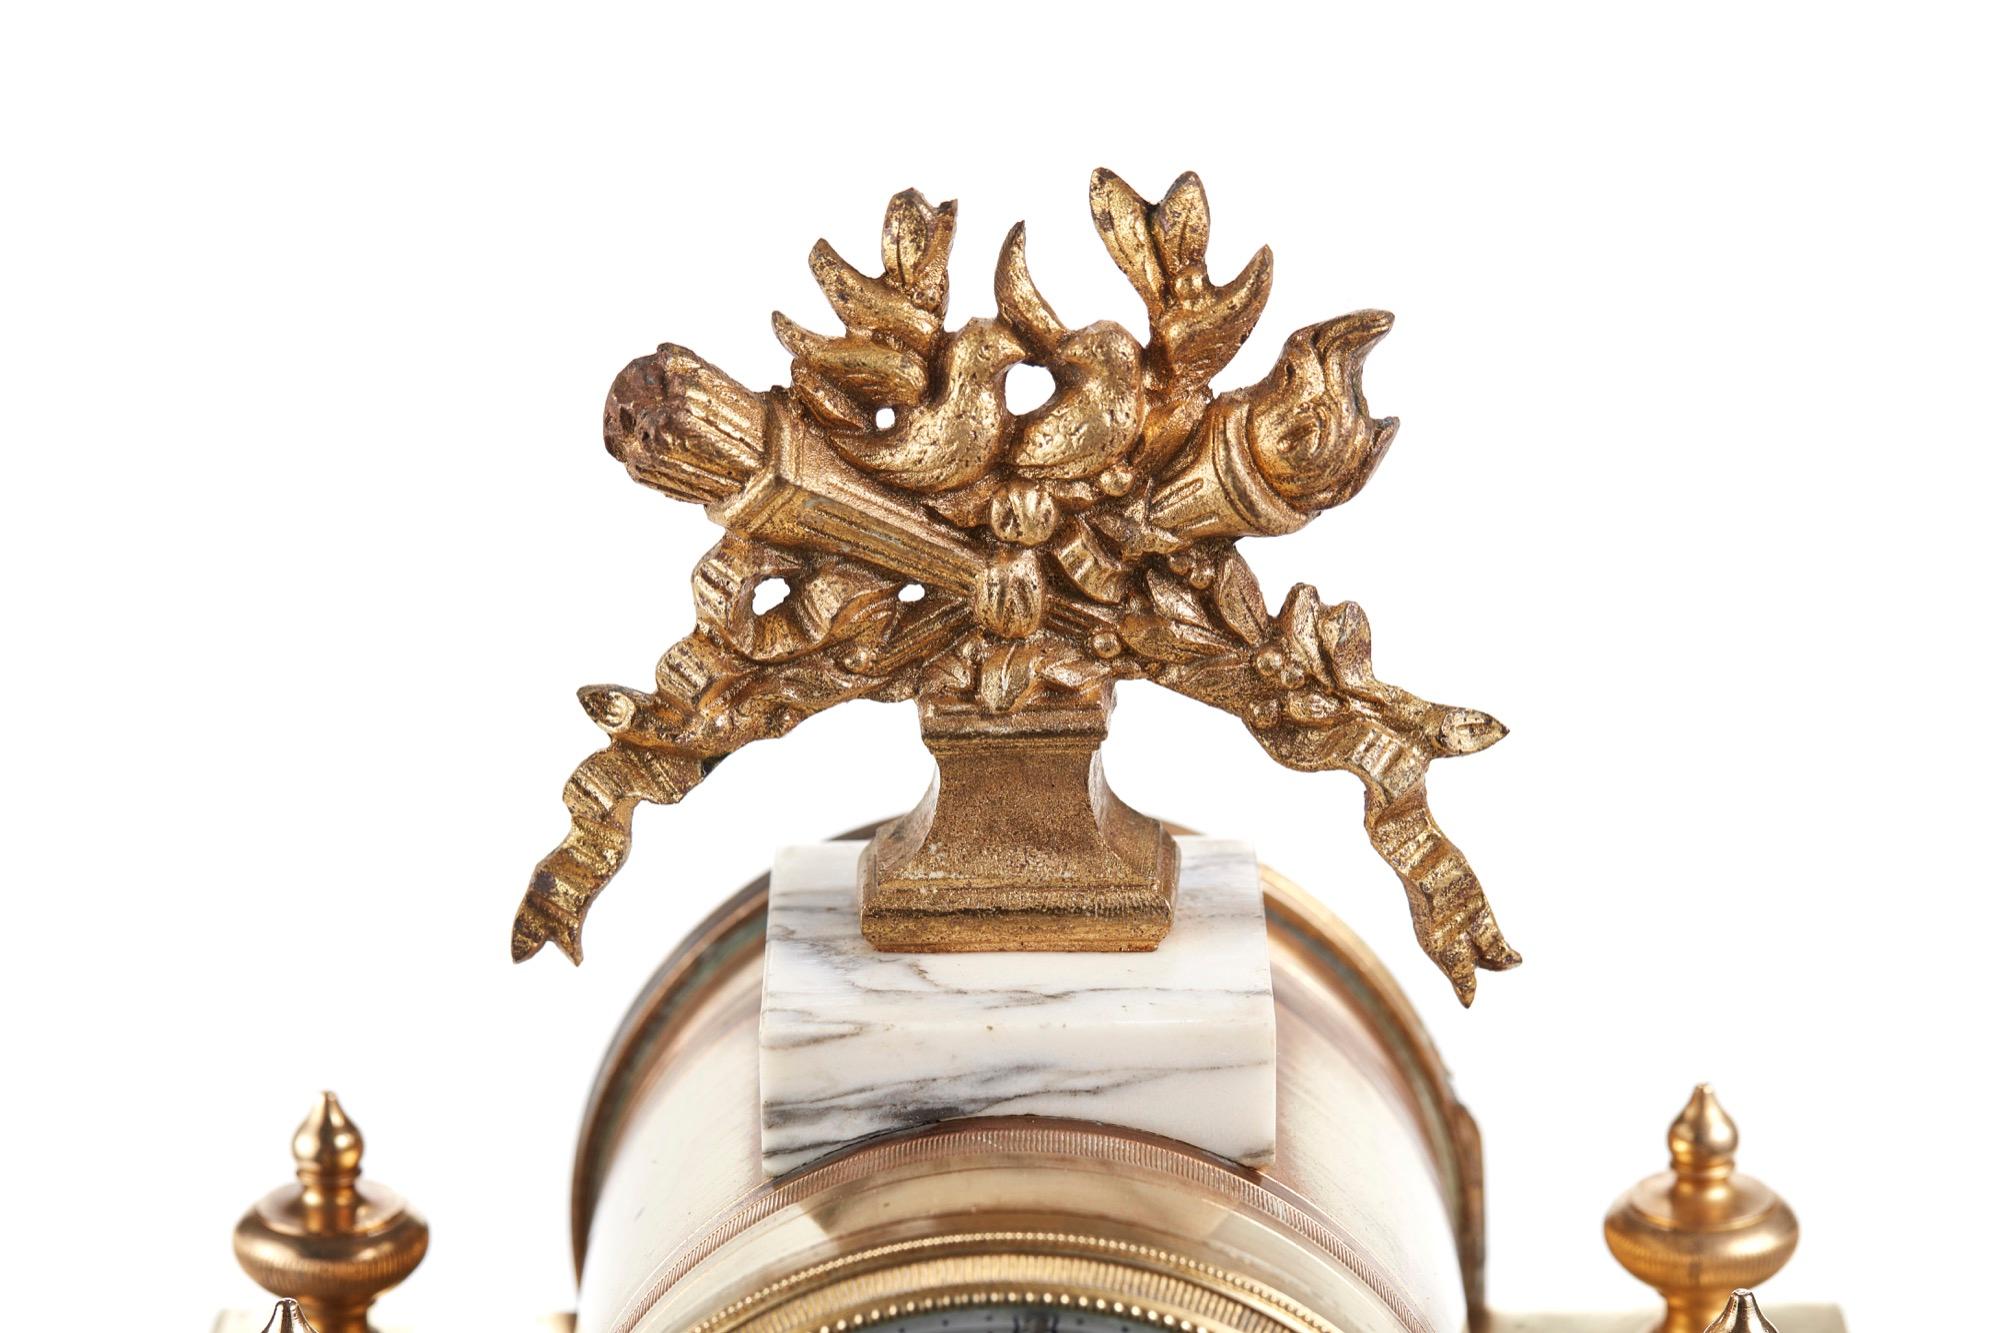 19th century French antique gilt brass and white marble mantle clock. Floral decorated enamel dial with twin train movement and sun-mask pendulum. Perfect working order and lovely overall condition, circa 1870.